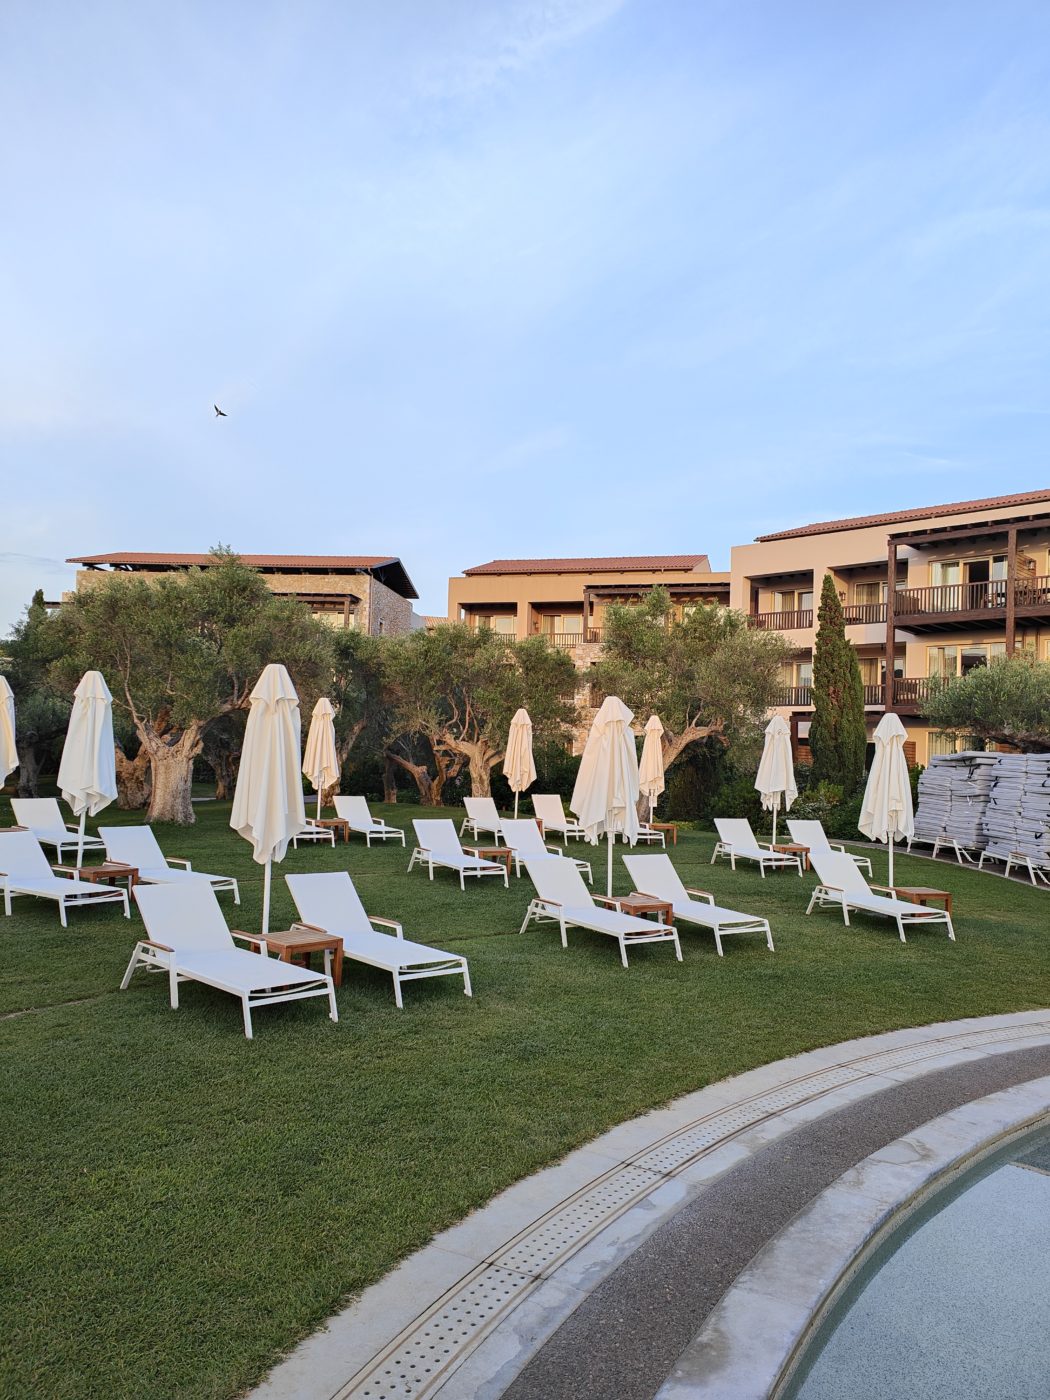 One of the pools at The Westin, Costa Navarino